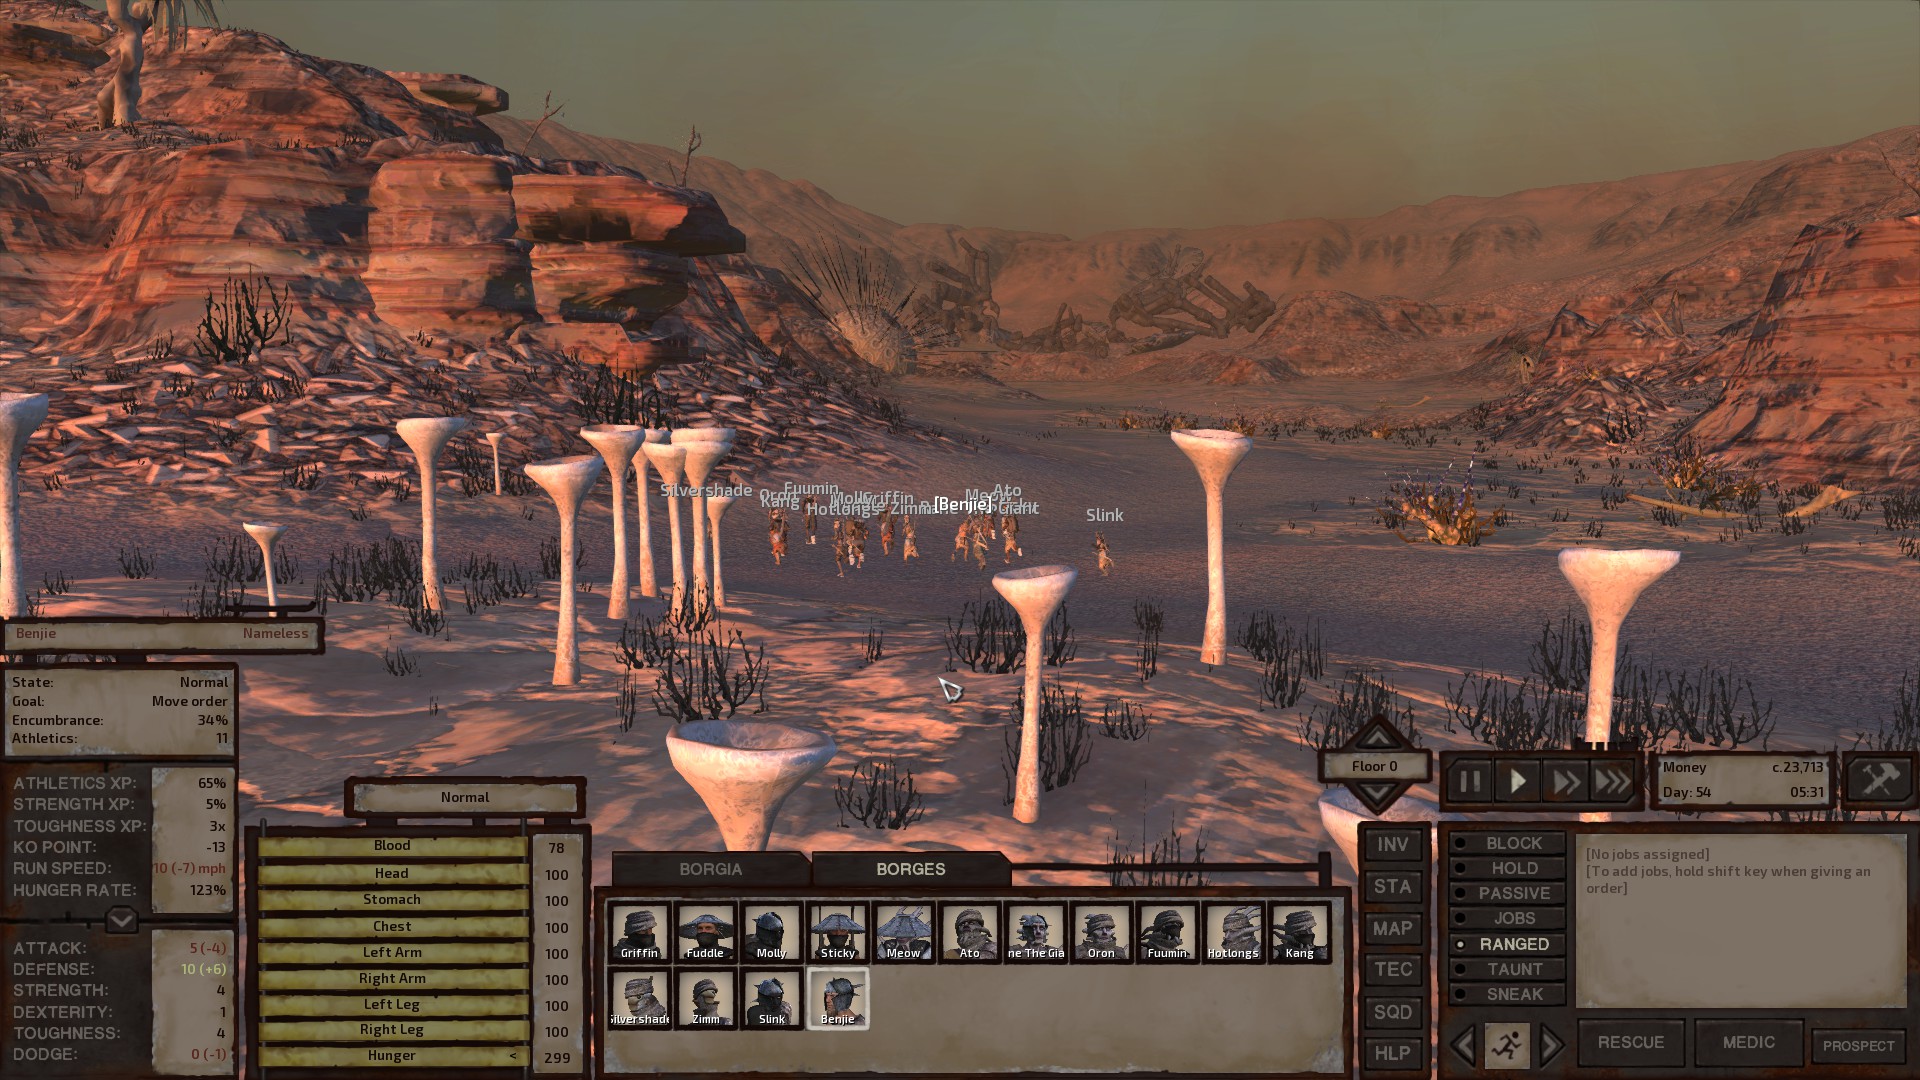 A desert canyon. In the foreground, 4-5 metre mushrooms. In the middle distance, a small group of people on the desert floor with names over their heads. In the distance, twisted rusted metal and rising canyon walls. In front of everything, a wildly overcomplicated user interface.